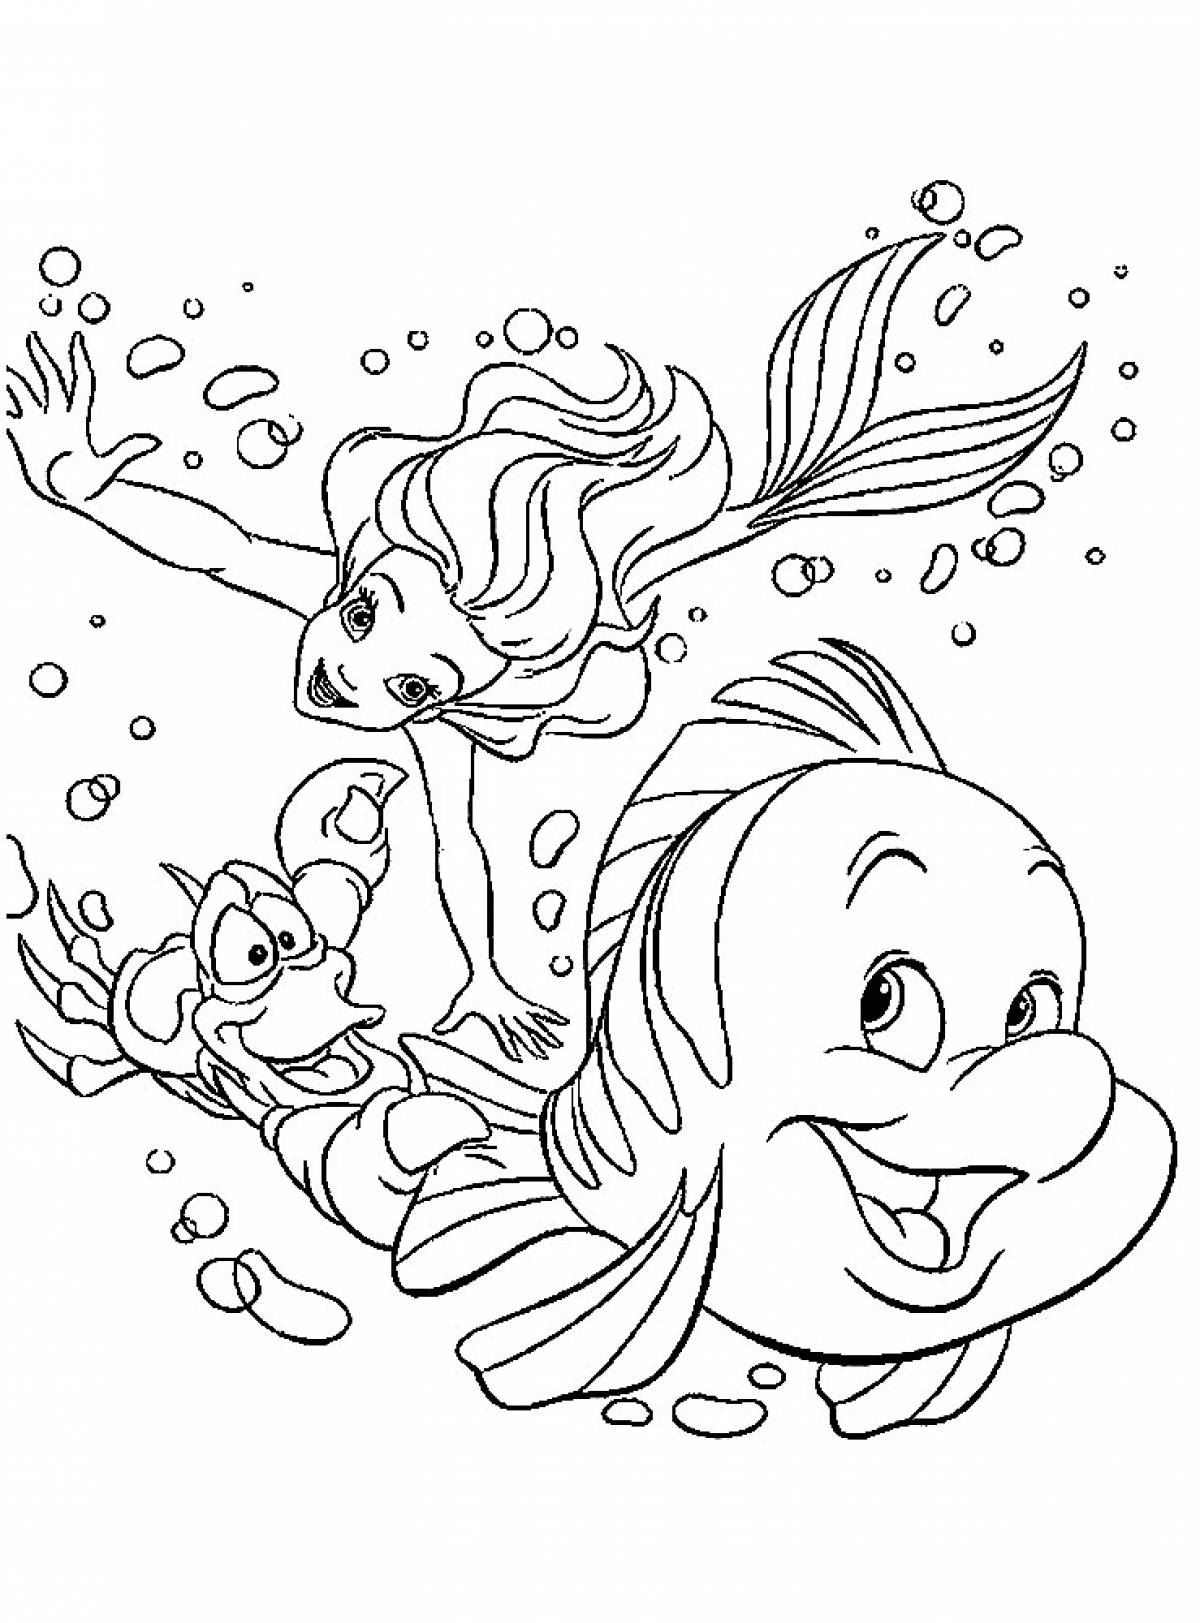 Ariel and friends coloring